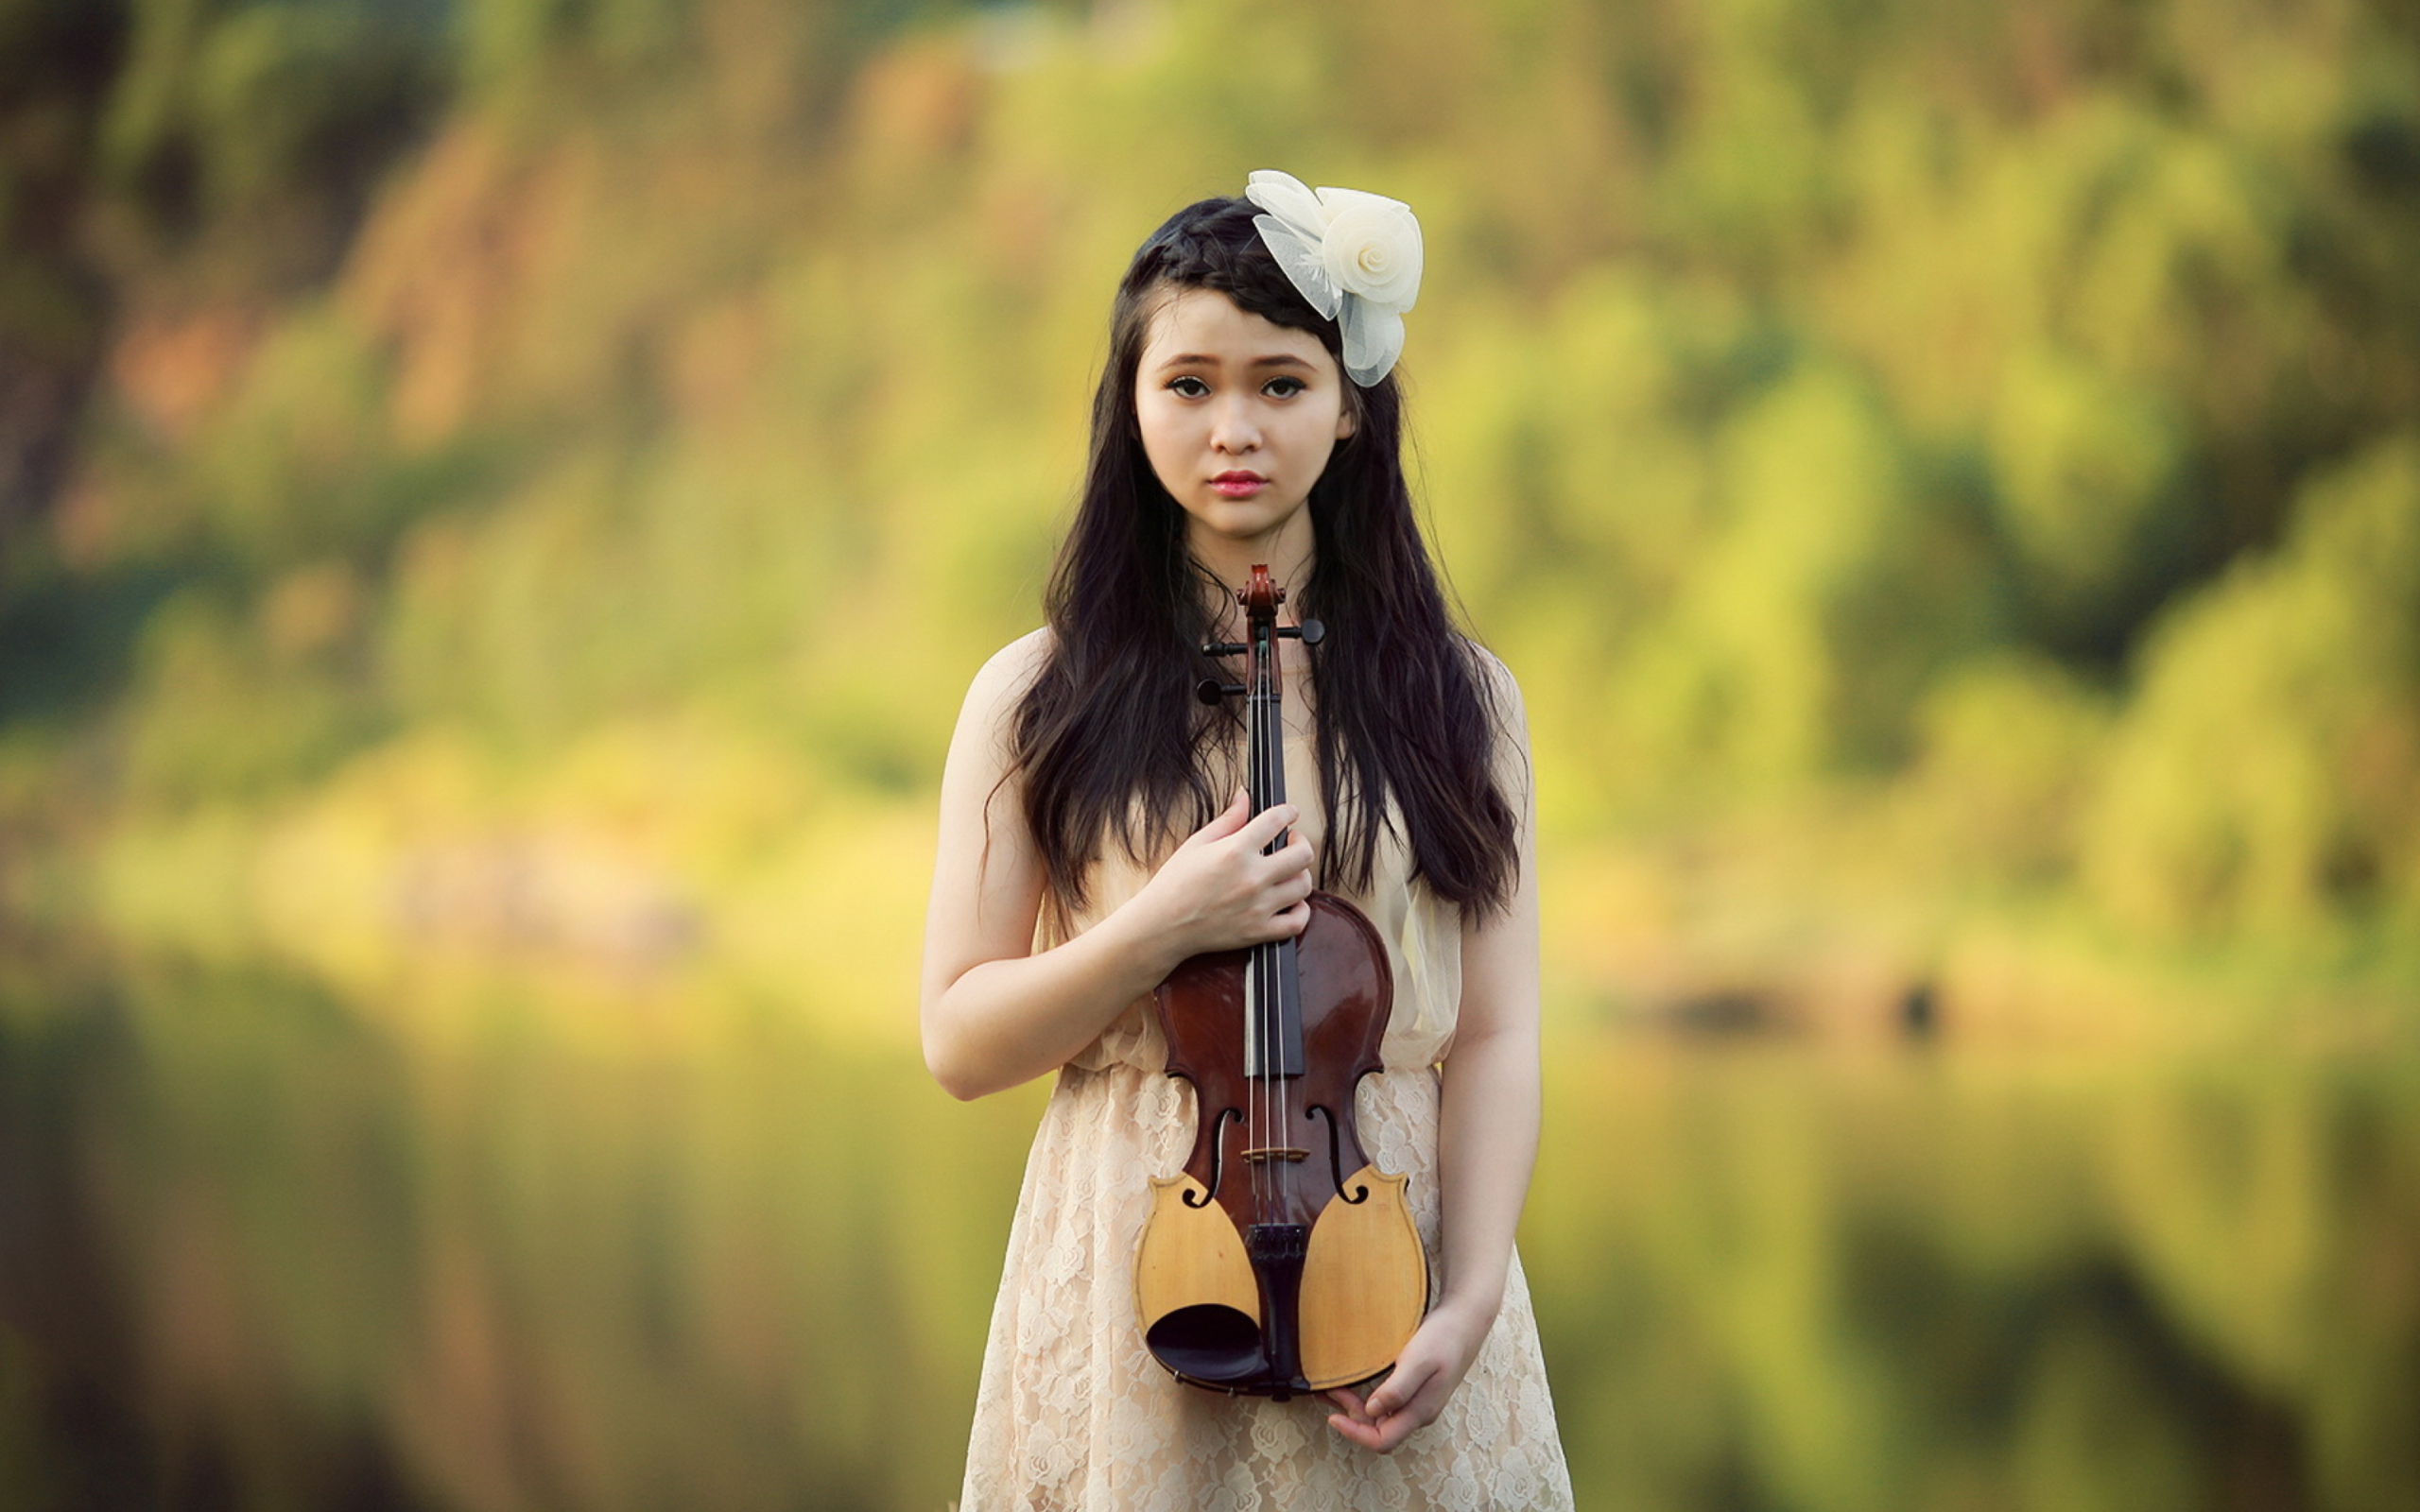 Girl With Violin wallpaper 2560x1600